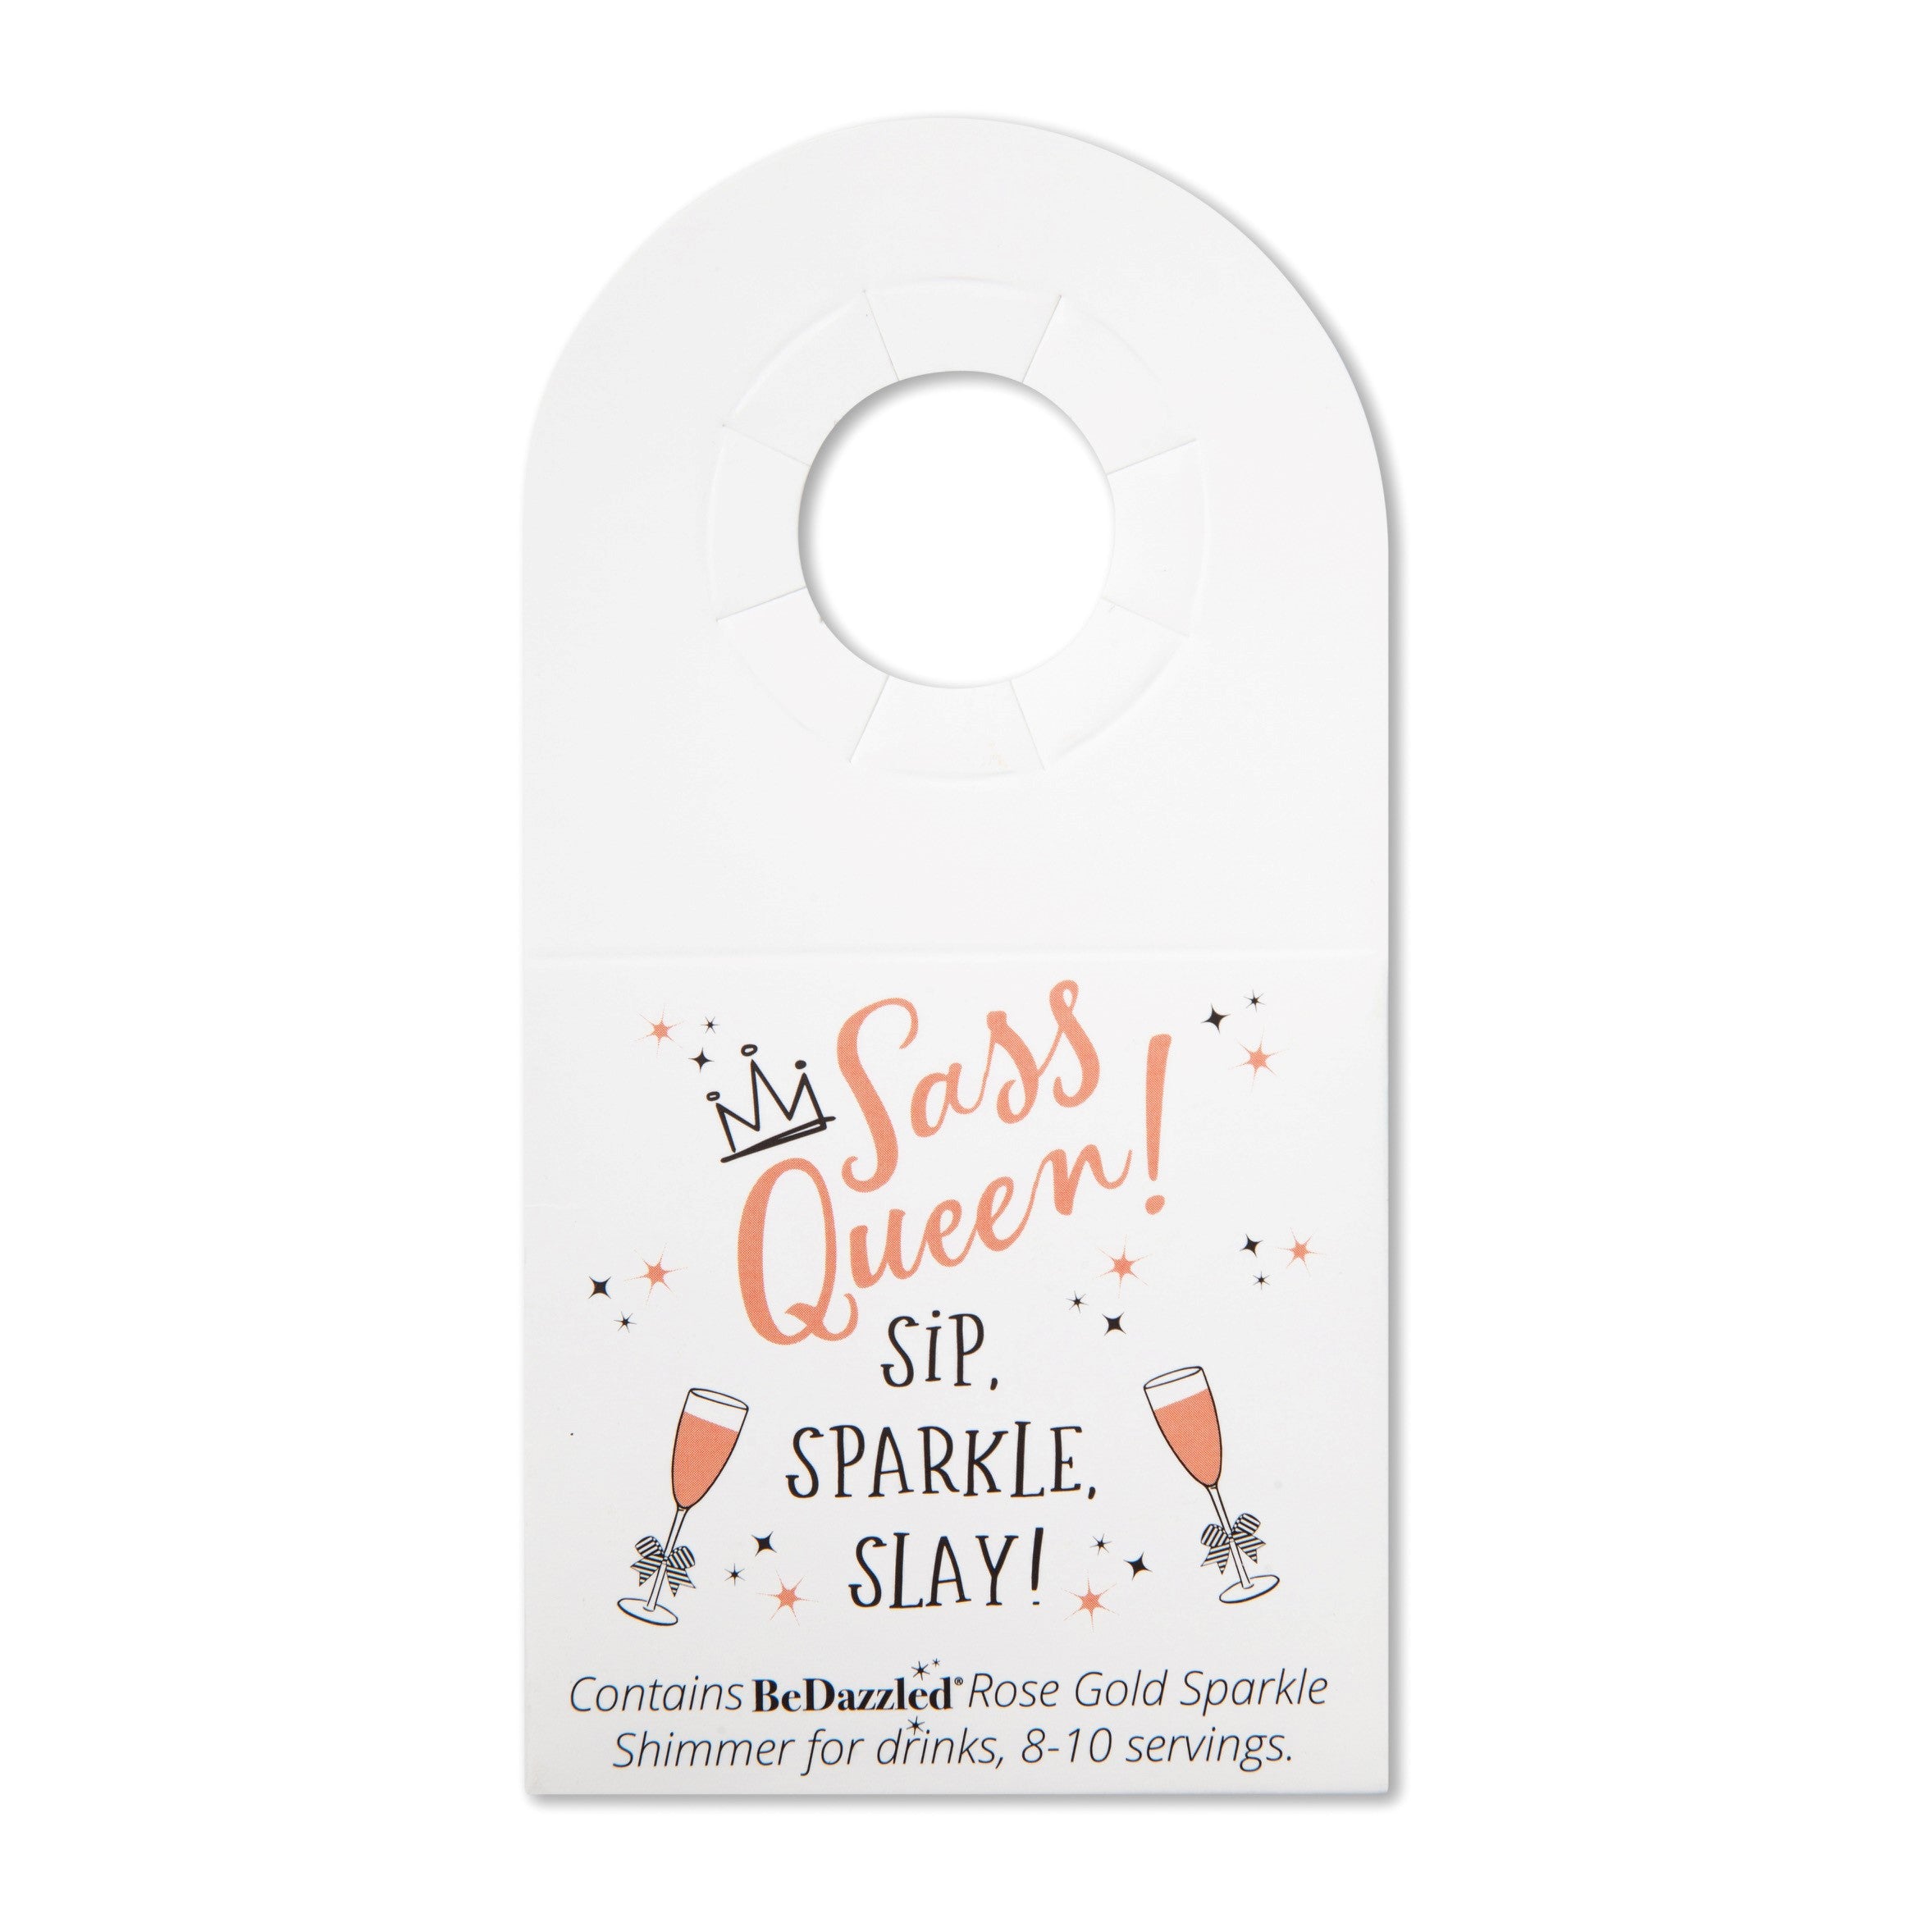 Sass Queen! Sip! Sparkle! Slay! - bottle neck gift tag containing ROSE GOLD shimmer